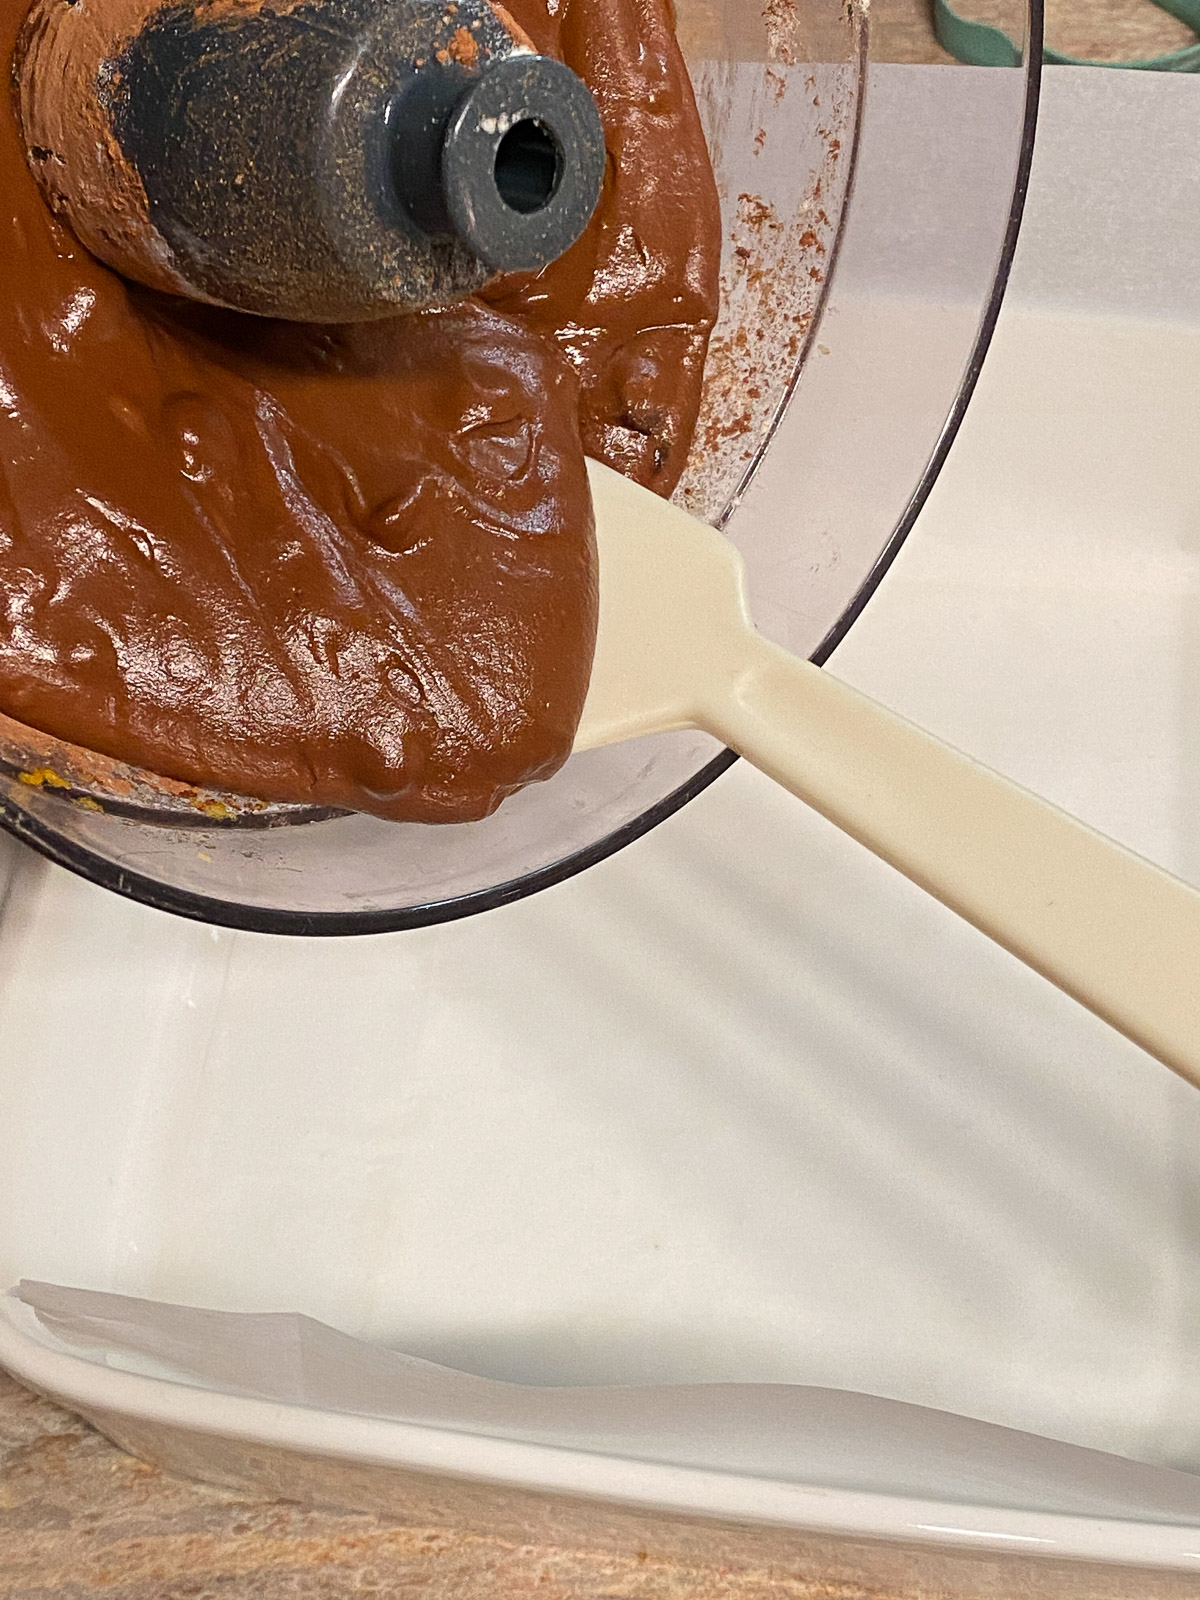 process of pouring the sweet potato brownie mixture into white baking tray